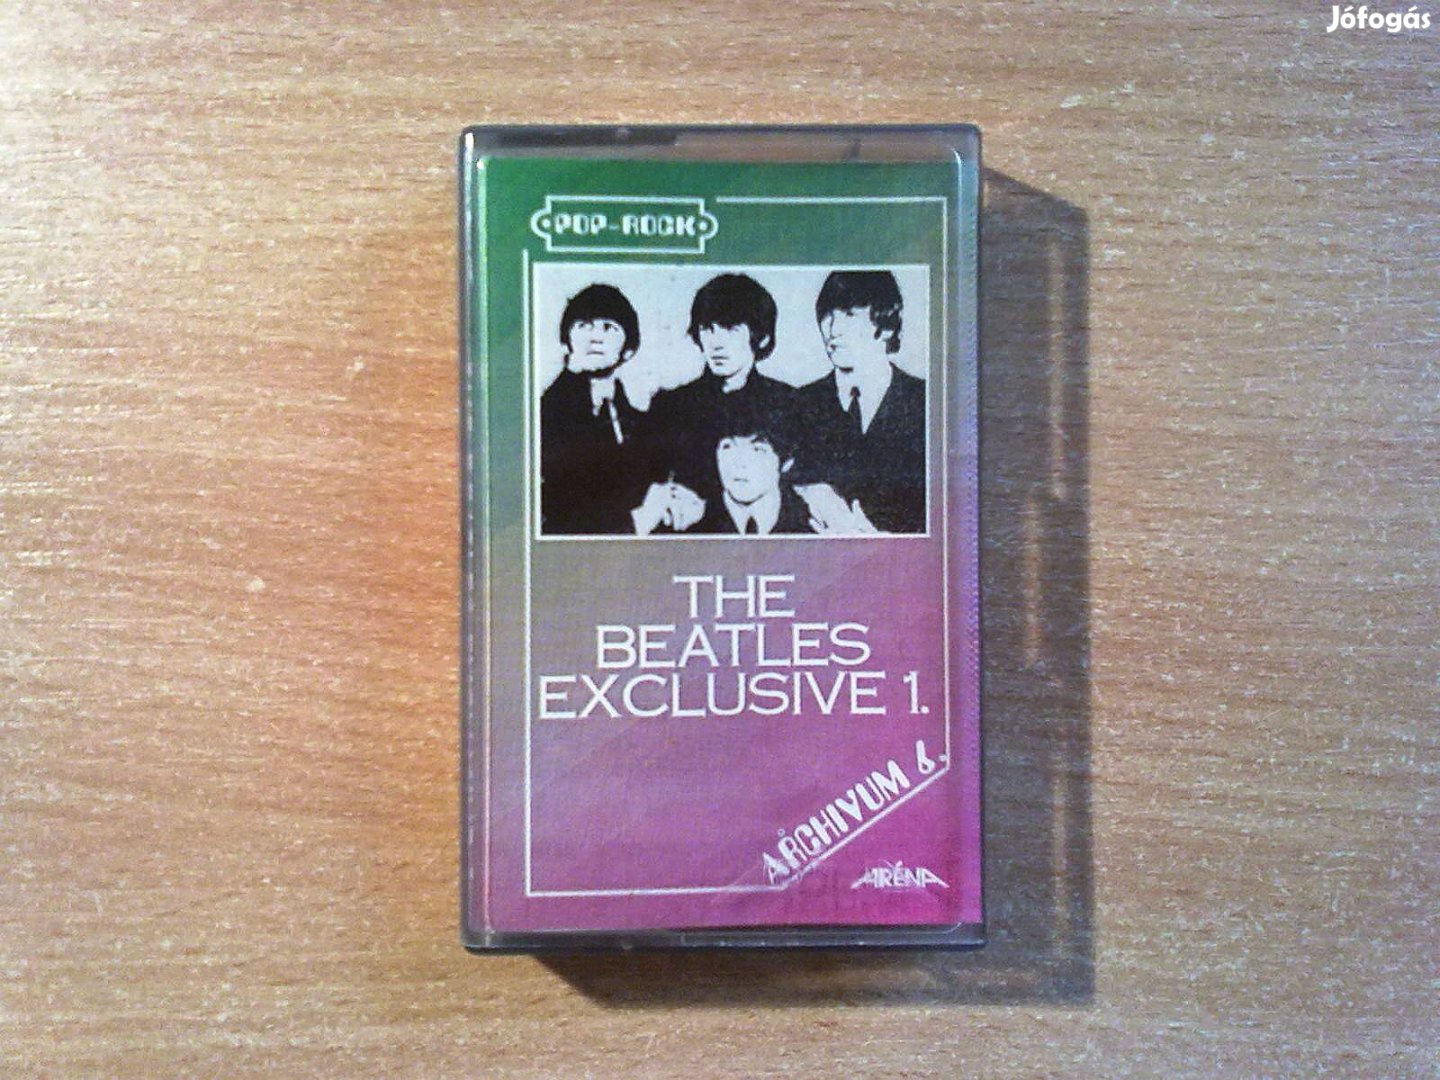 The Beatles Exclusive 1